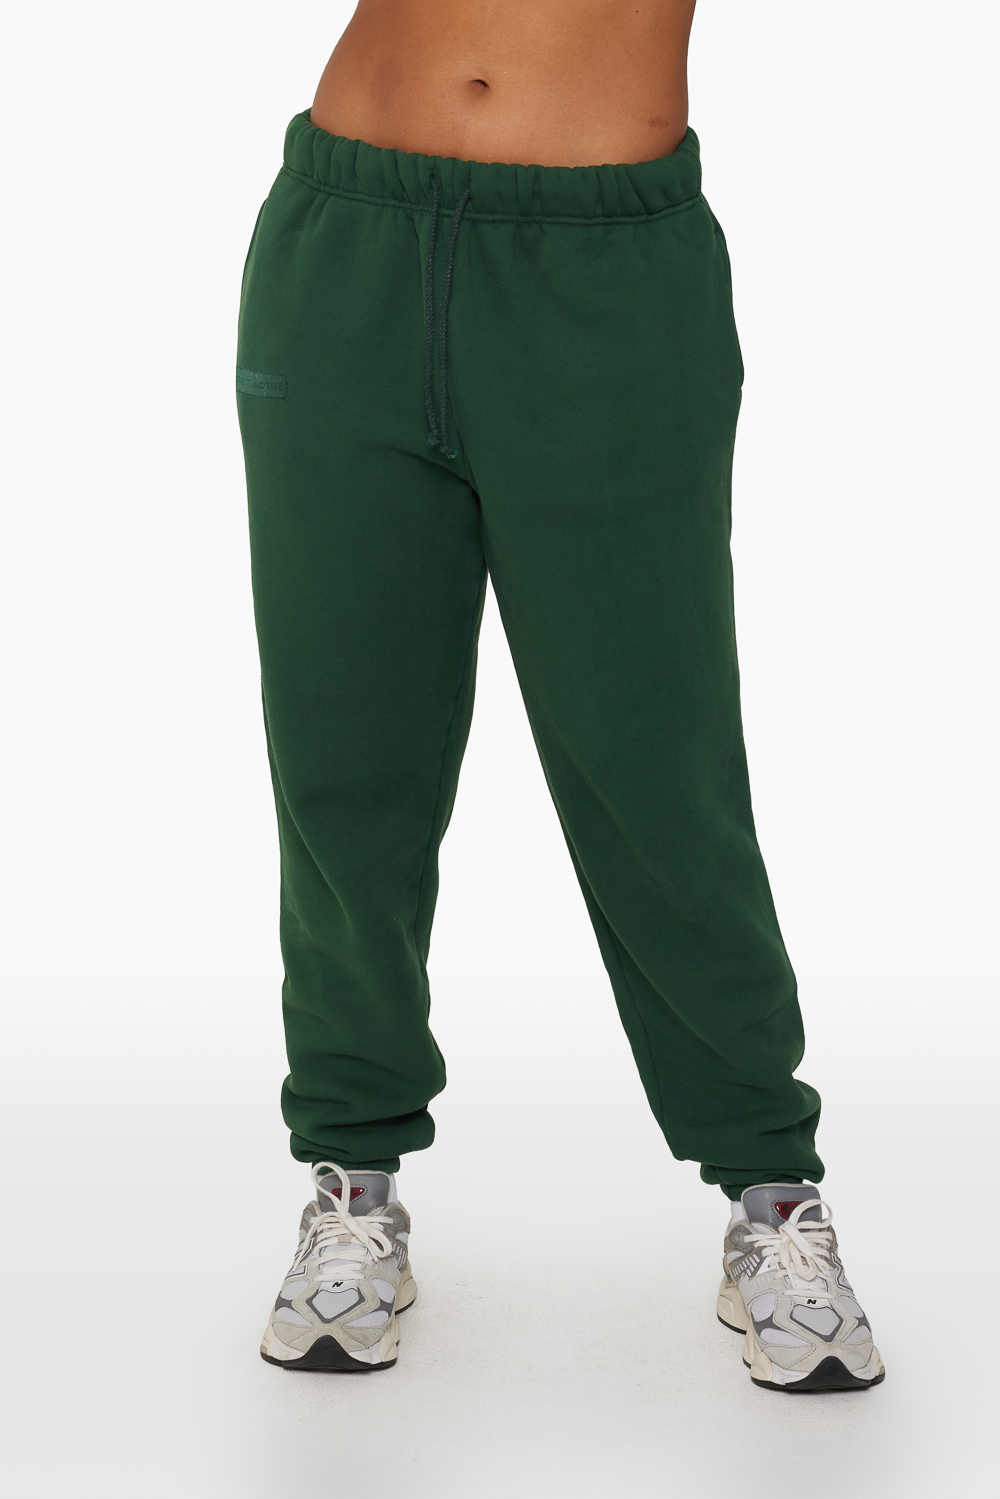 HEAVYWEIGHT SWEATS DRAWSTRING SWEATPANTS - SYCAMORE Featured Image